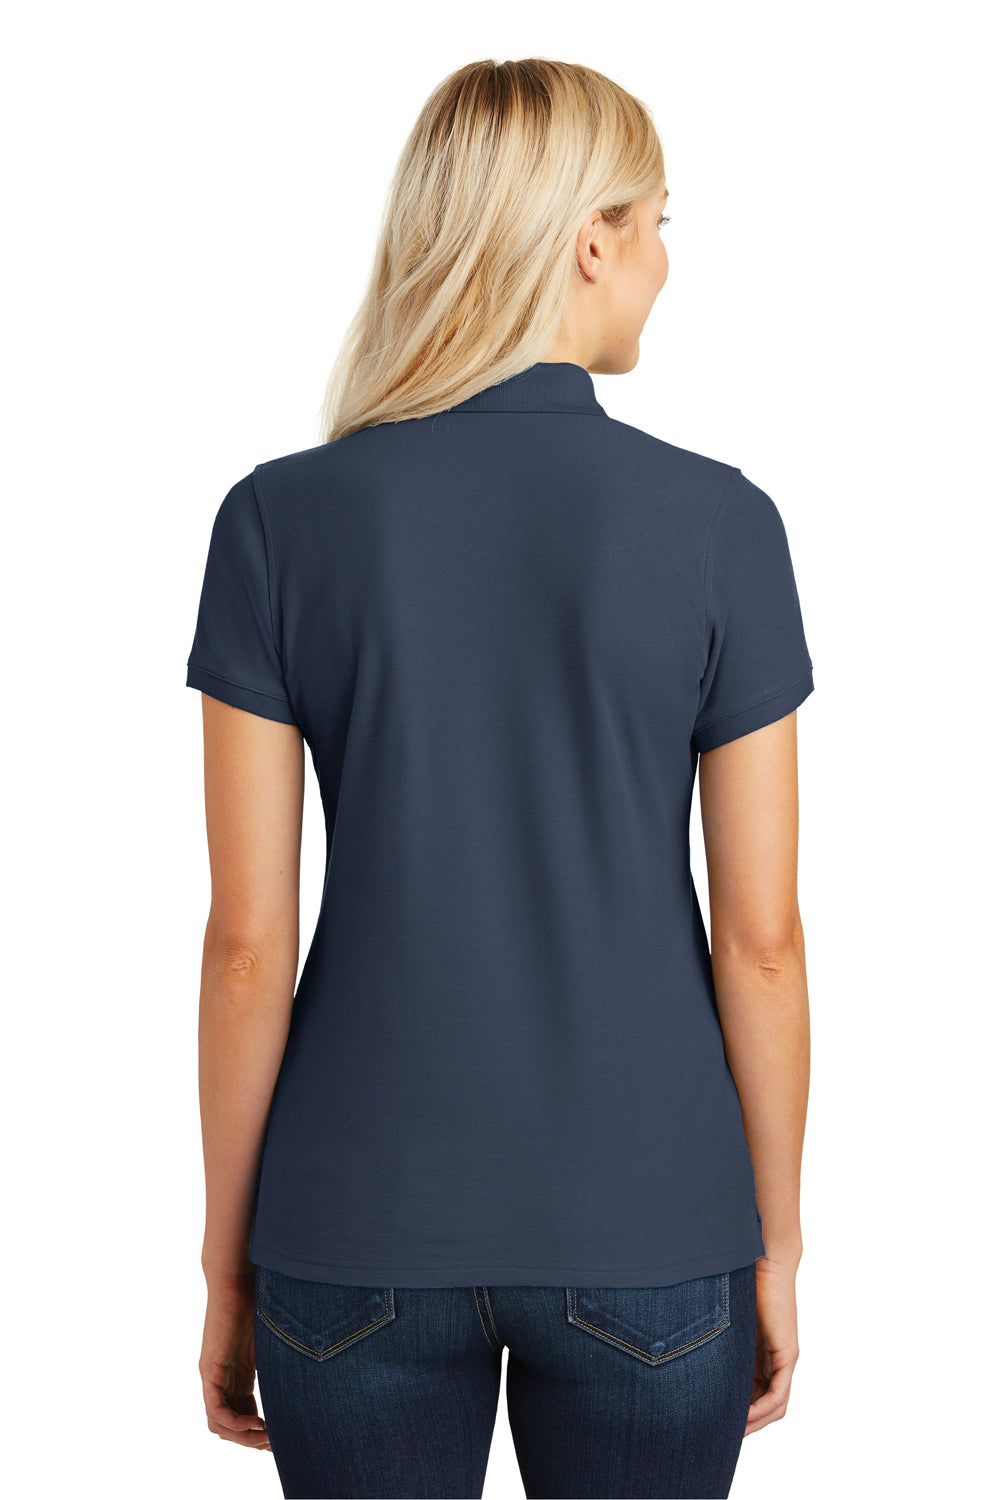 Port Authority L100 Womens Core Classic Short Sleeve Polo Shirt Navy Blue Back